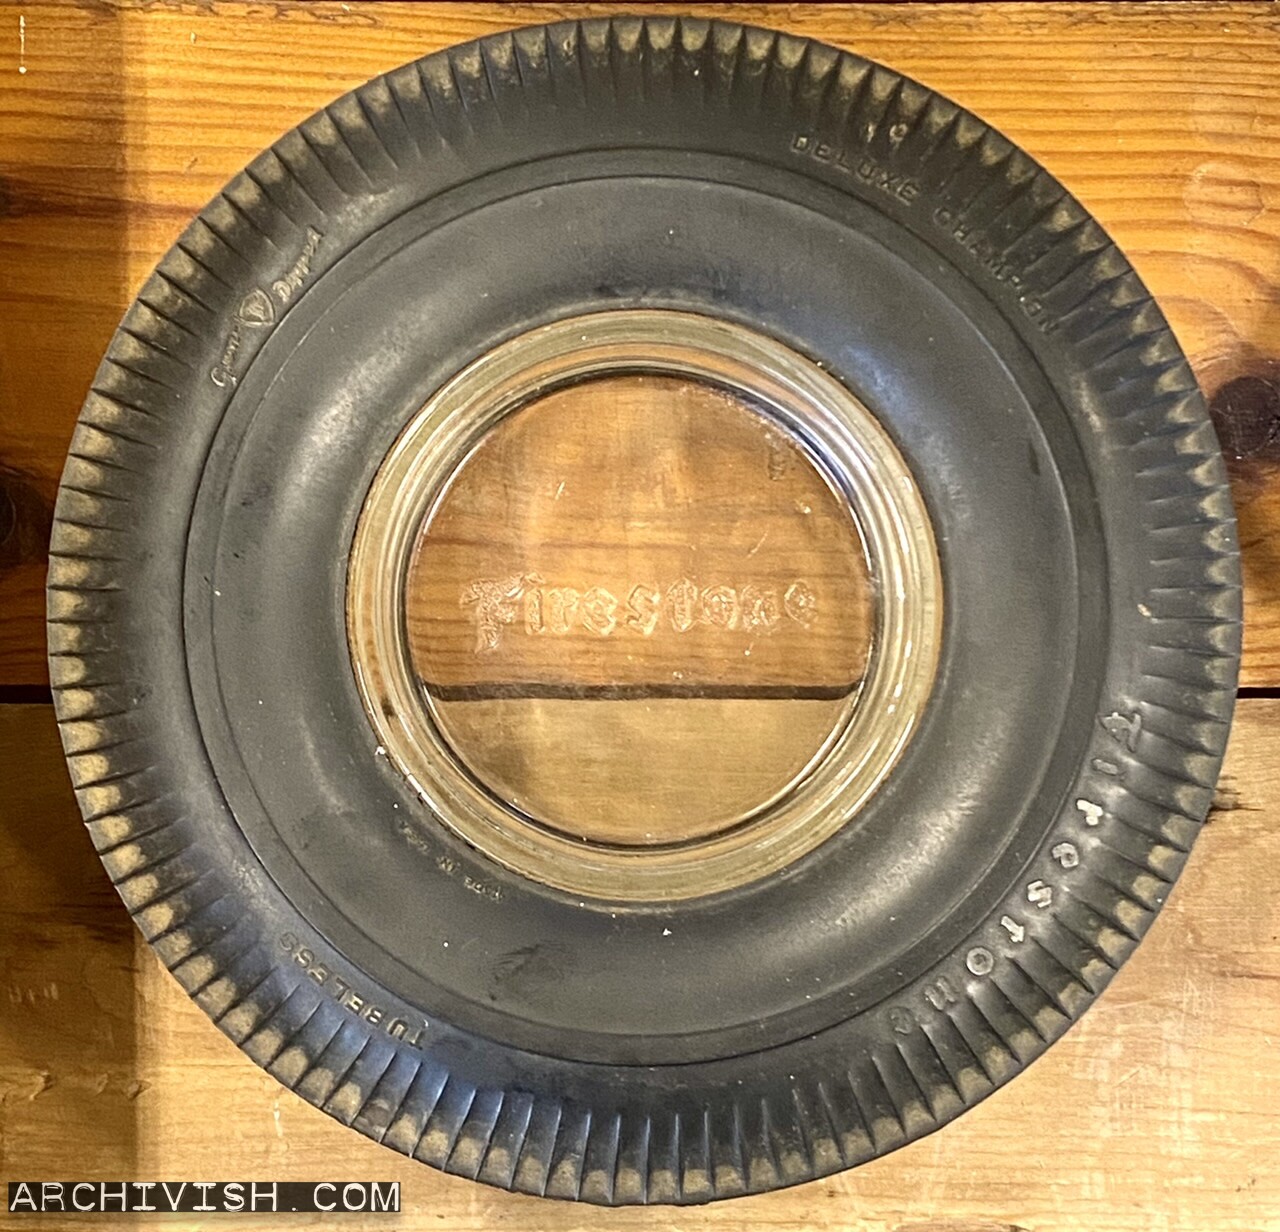 Firestone Tire and Rubber Company - Tyre advertisement, made as a miniature tyre